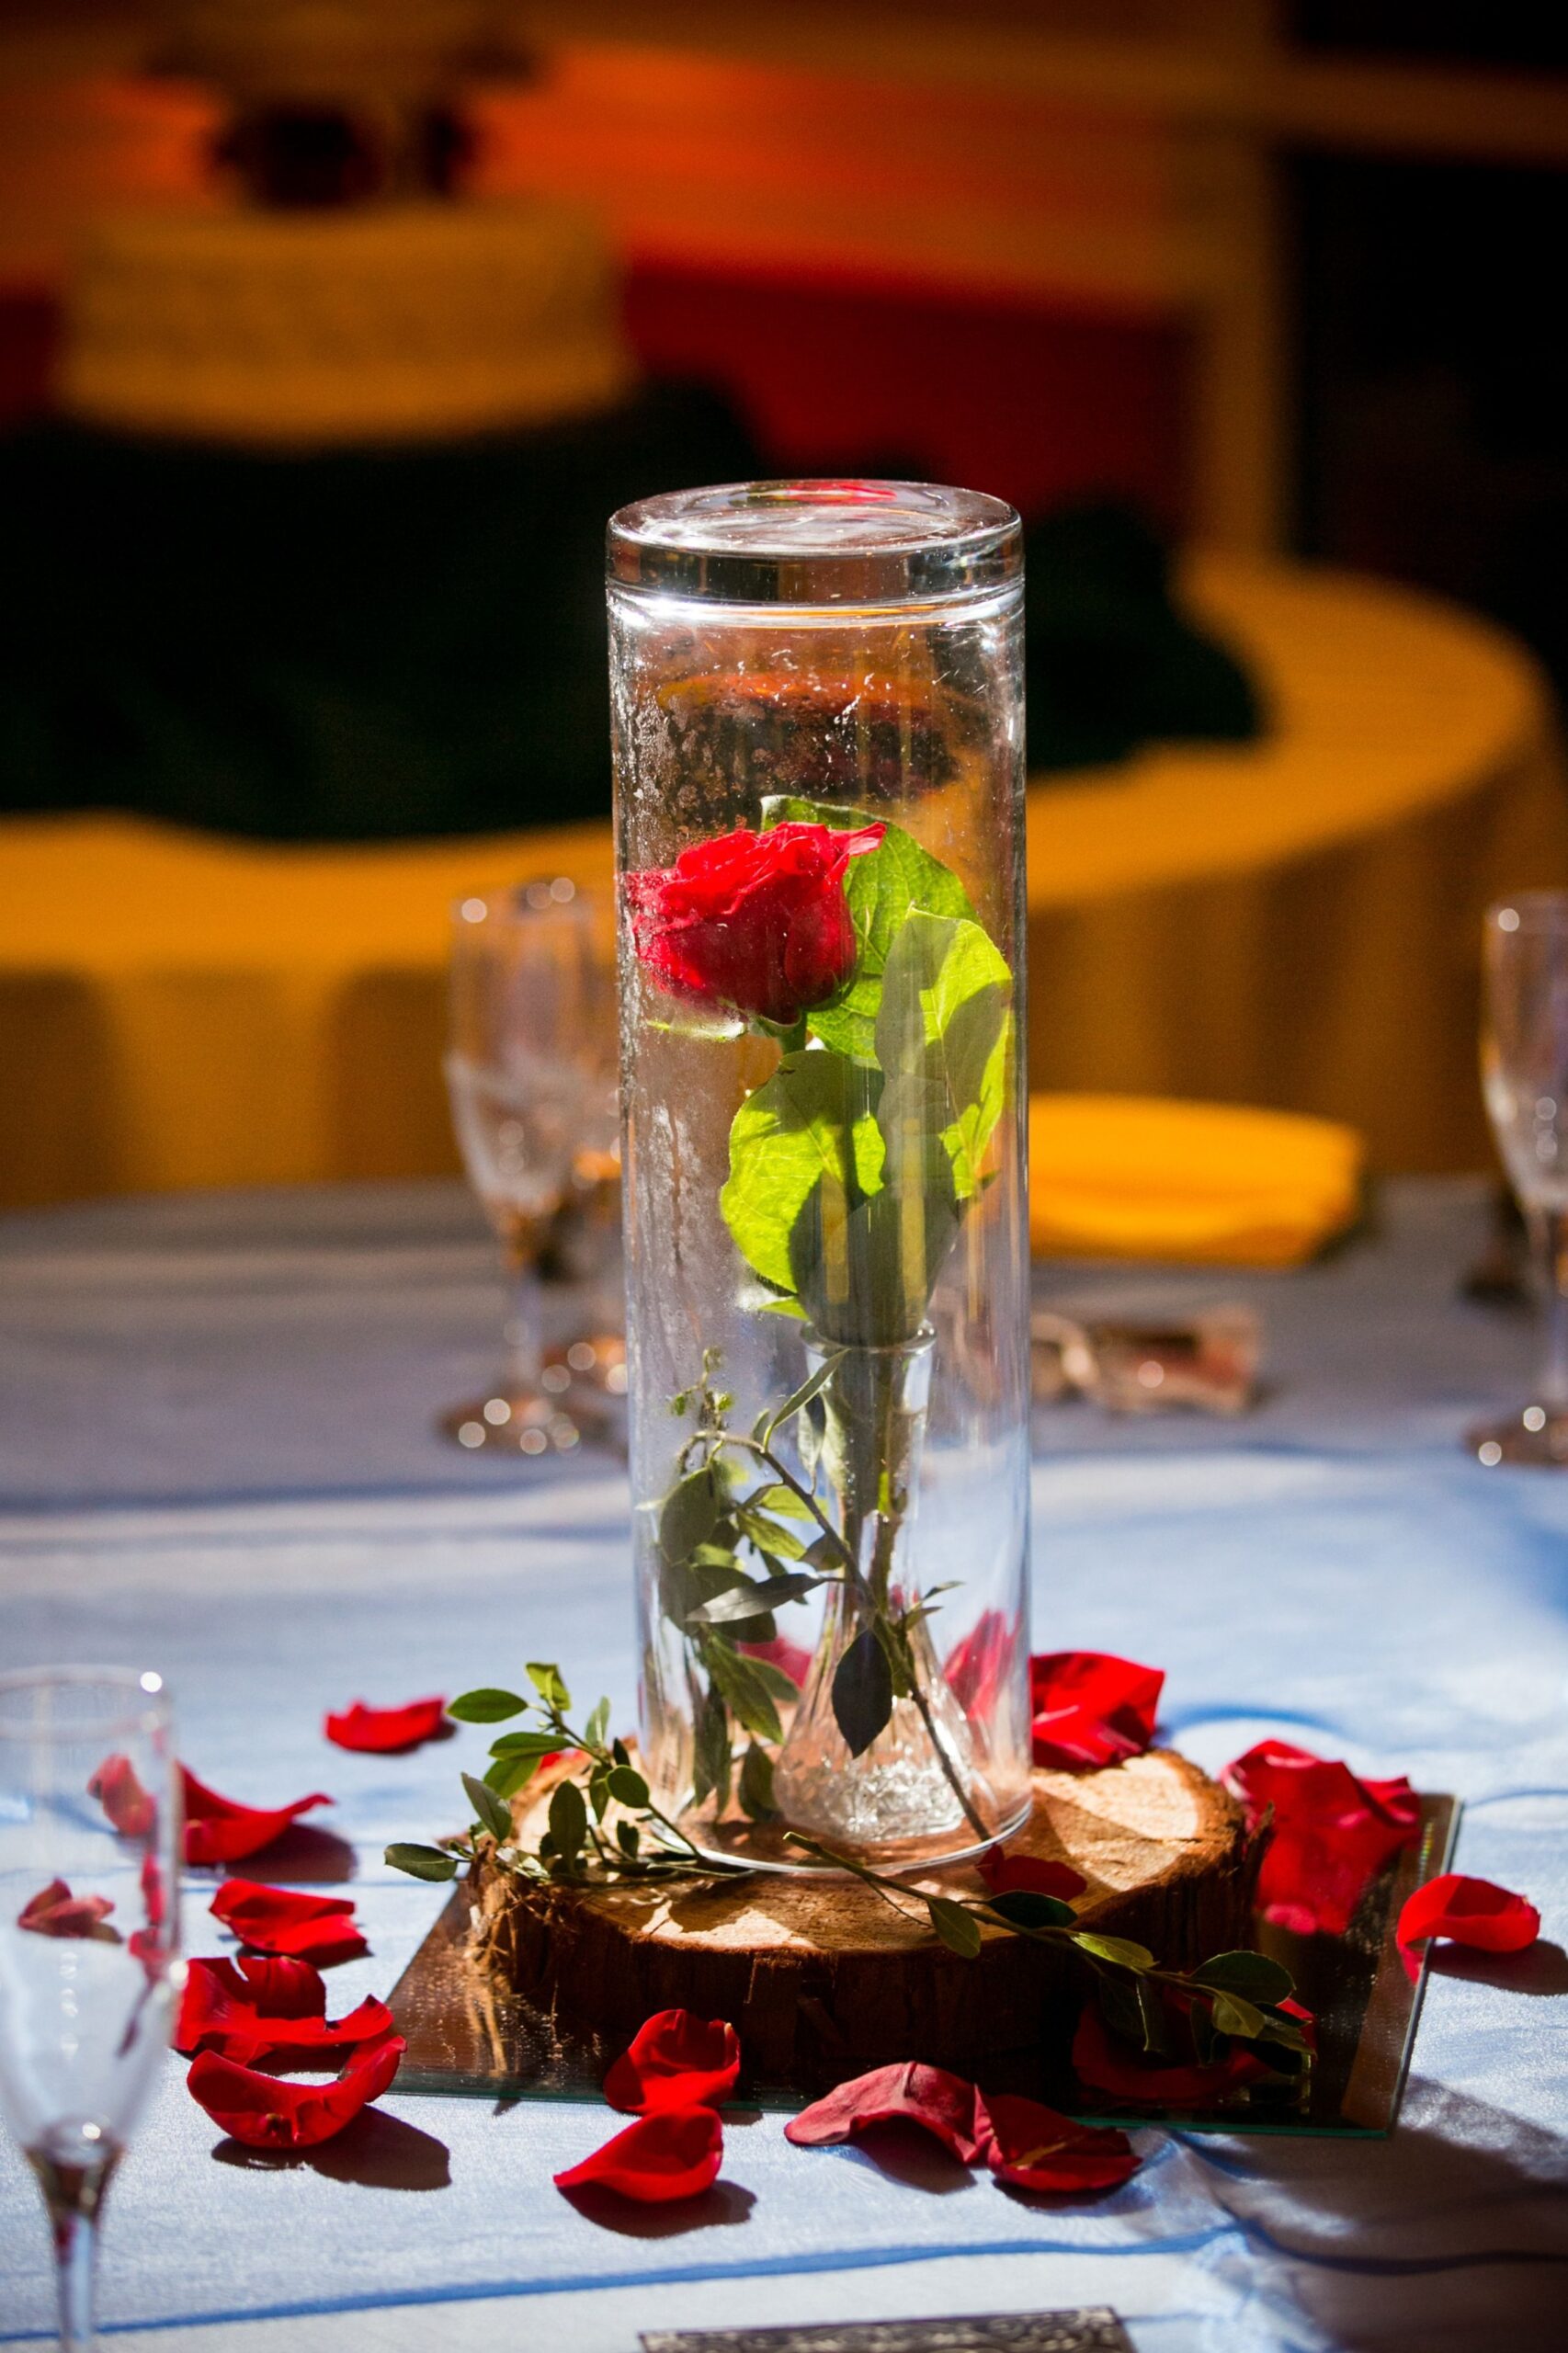 beauty and the beast wedding table decorations Bulan 4 Beauty and the Beast Wedding Centerpieces